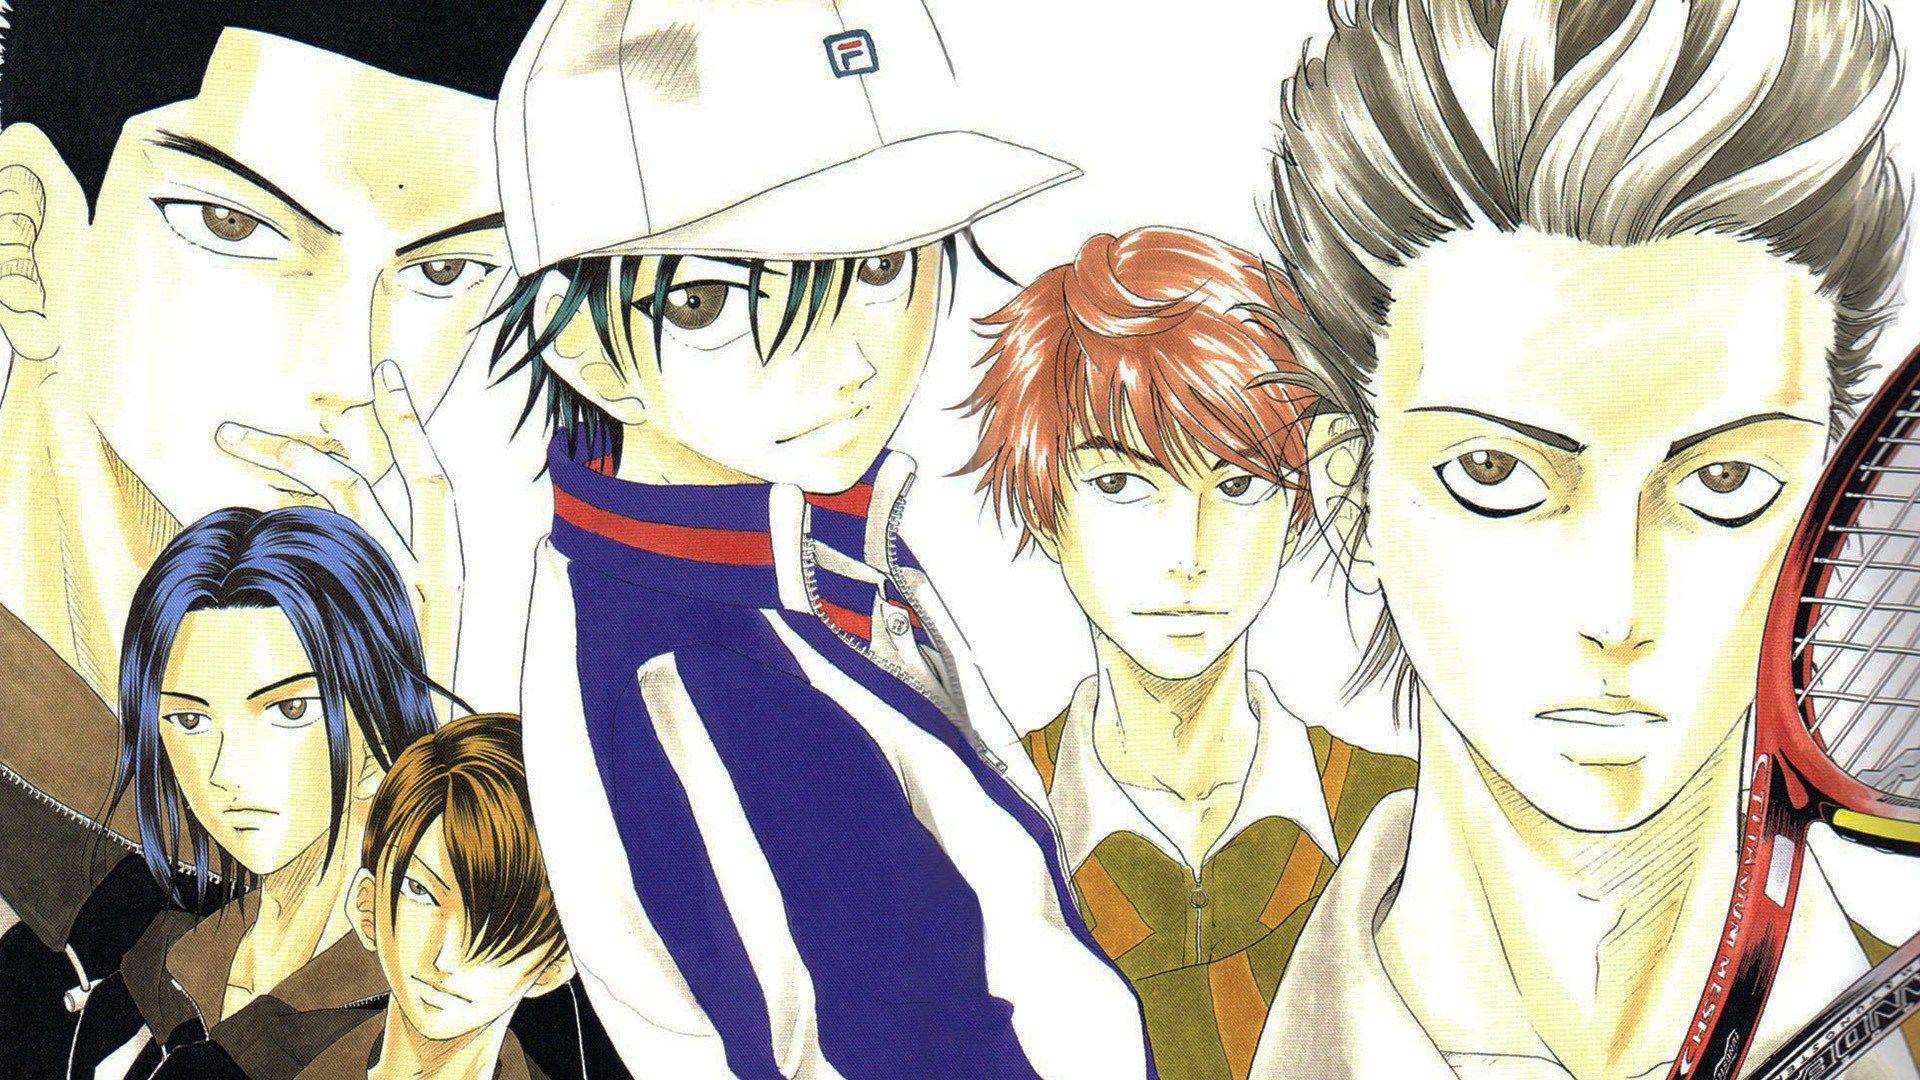 Ryoma Echizen, The Prince of Tennis HD Wallpaper & Background